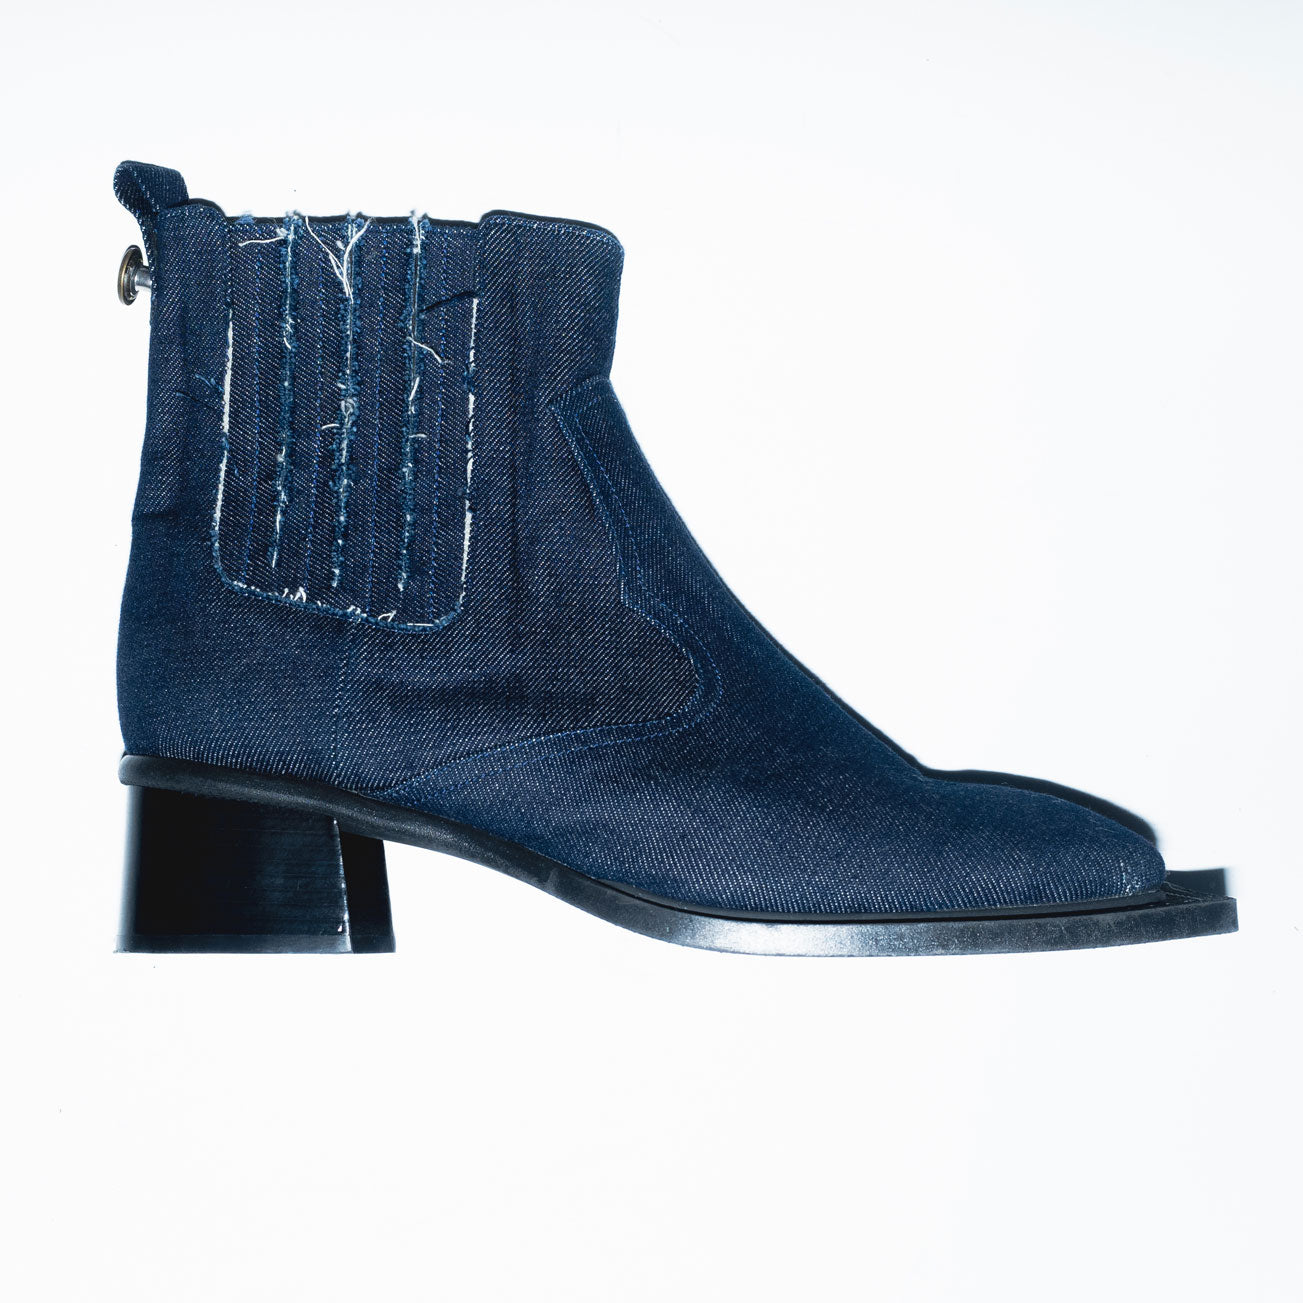 Archive Howler Ankle Boots in Dark Blue Denim